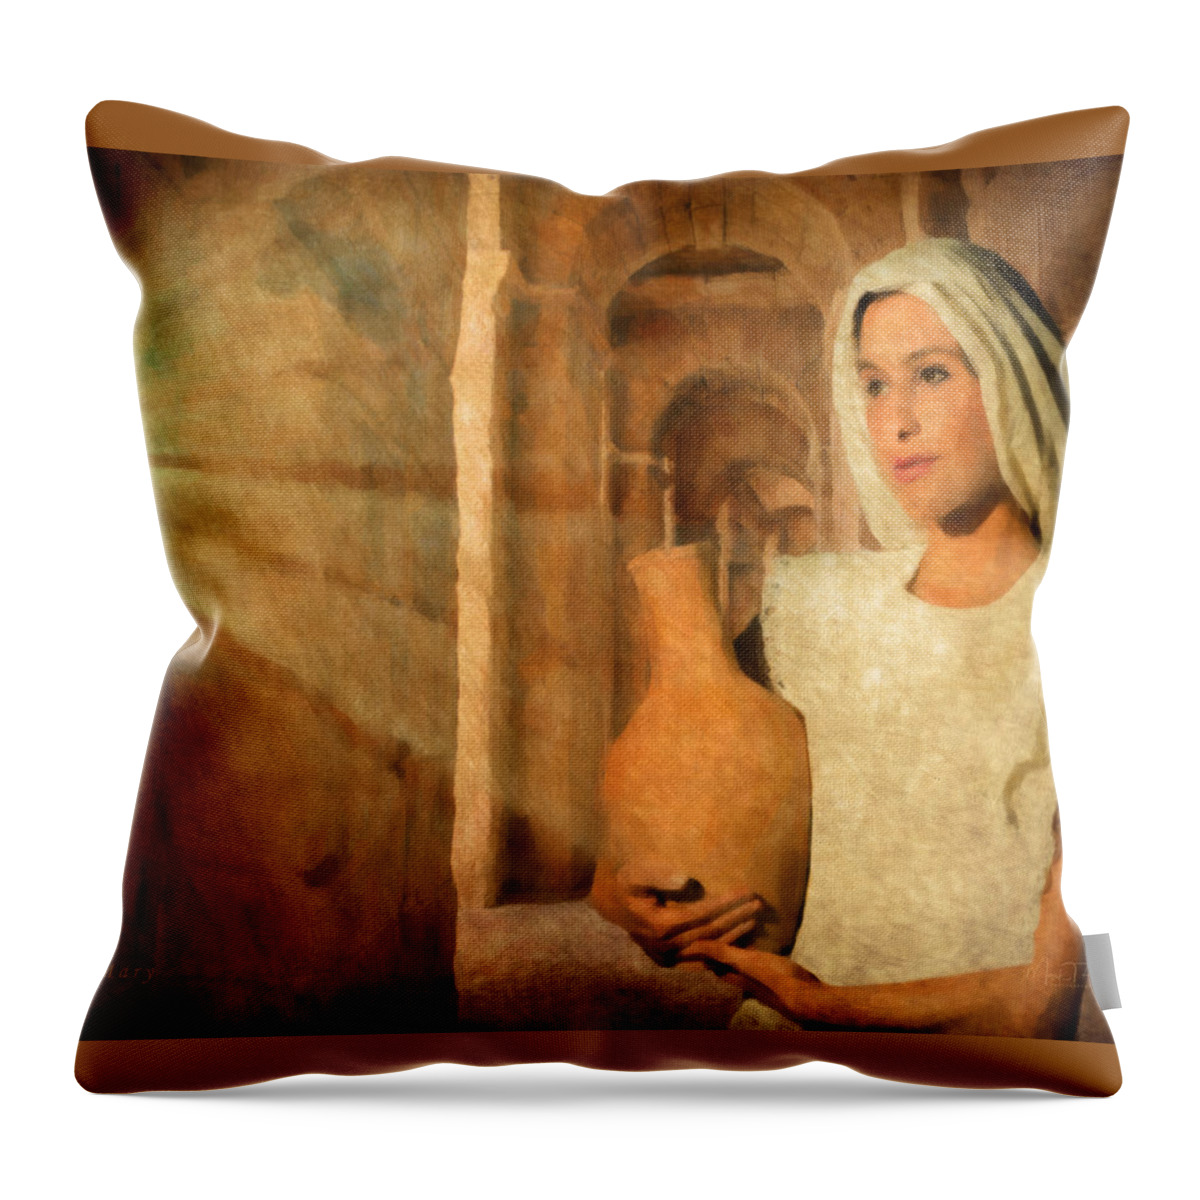 Mary Throw Pillow featuring the digital art Mary by Mark Allen